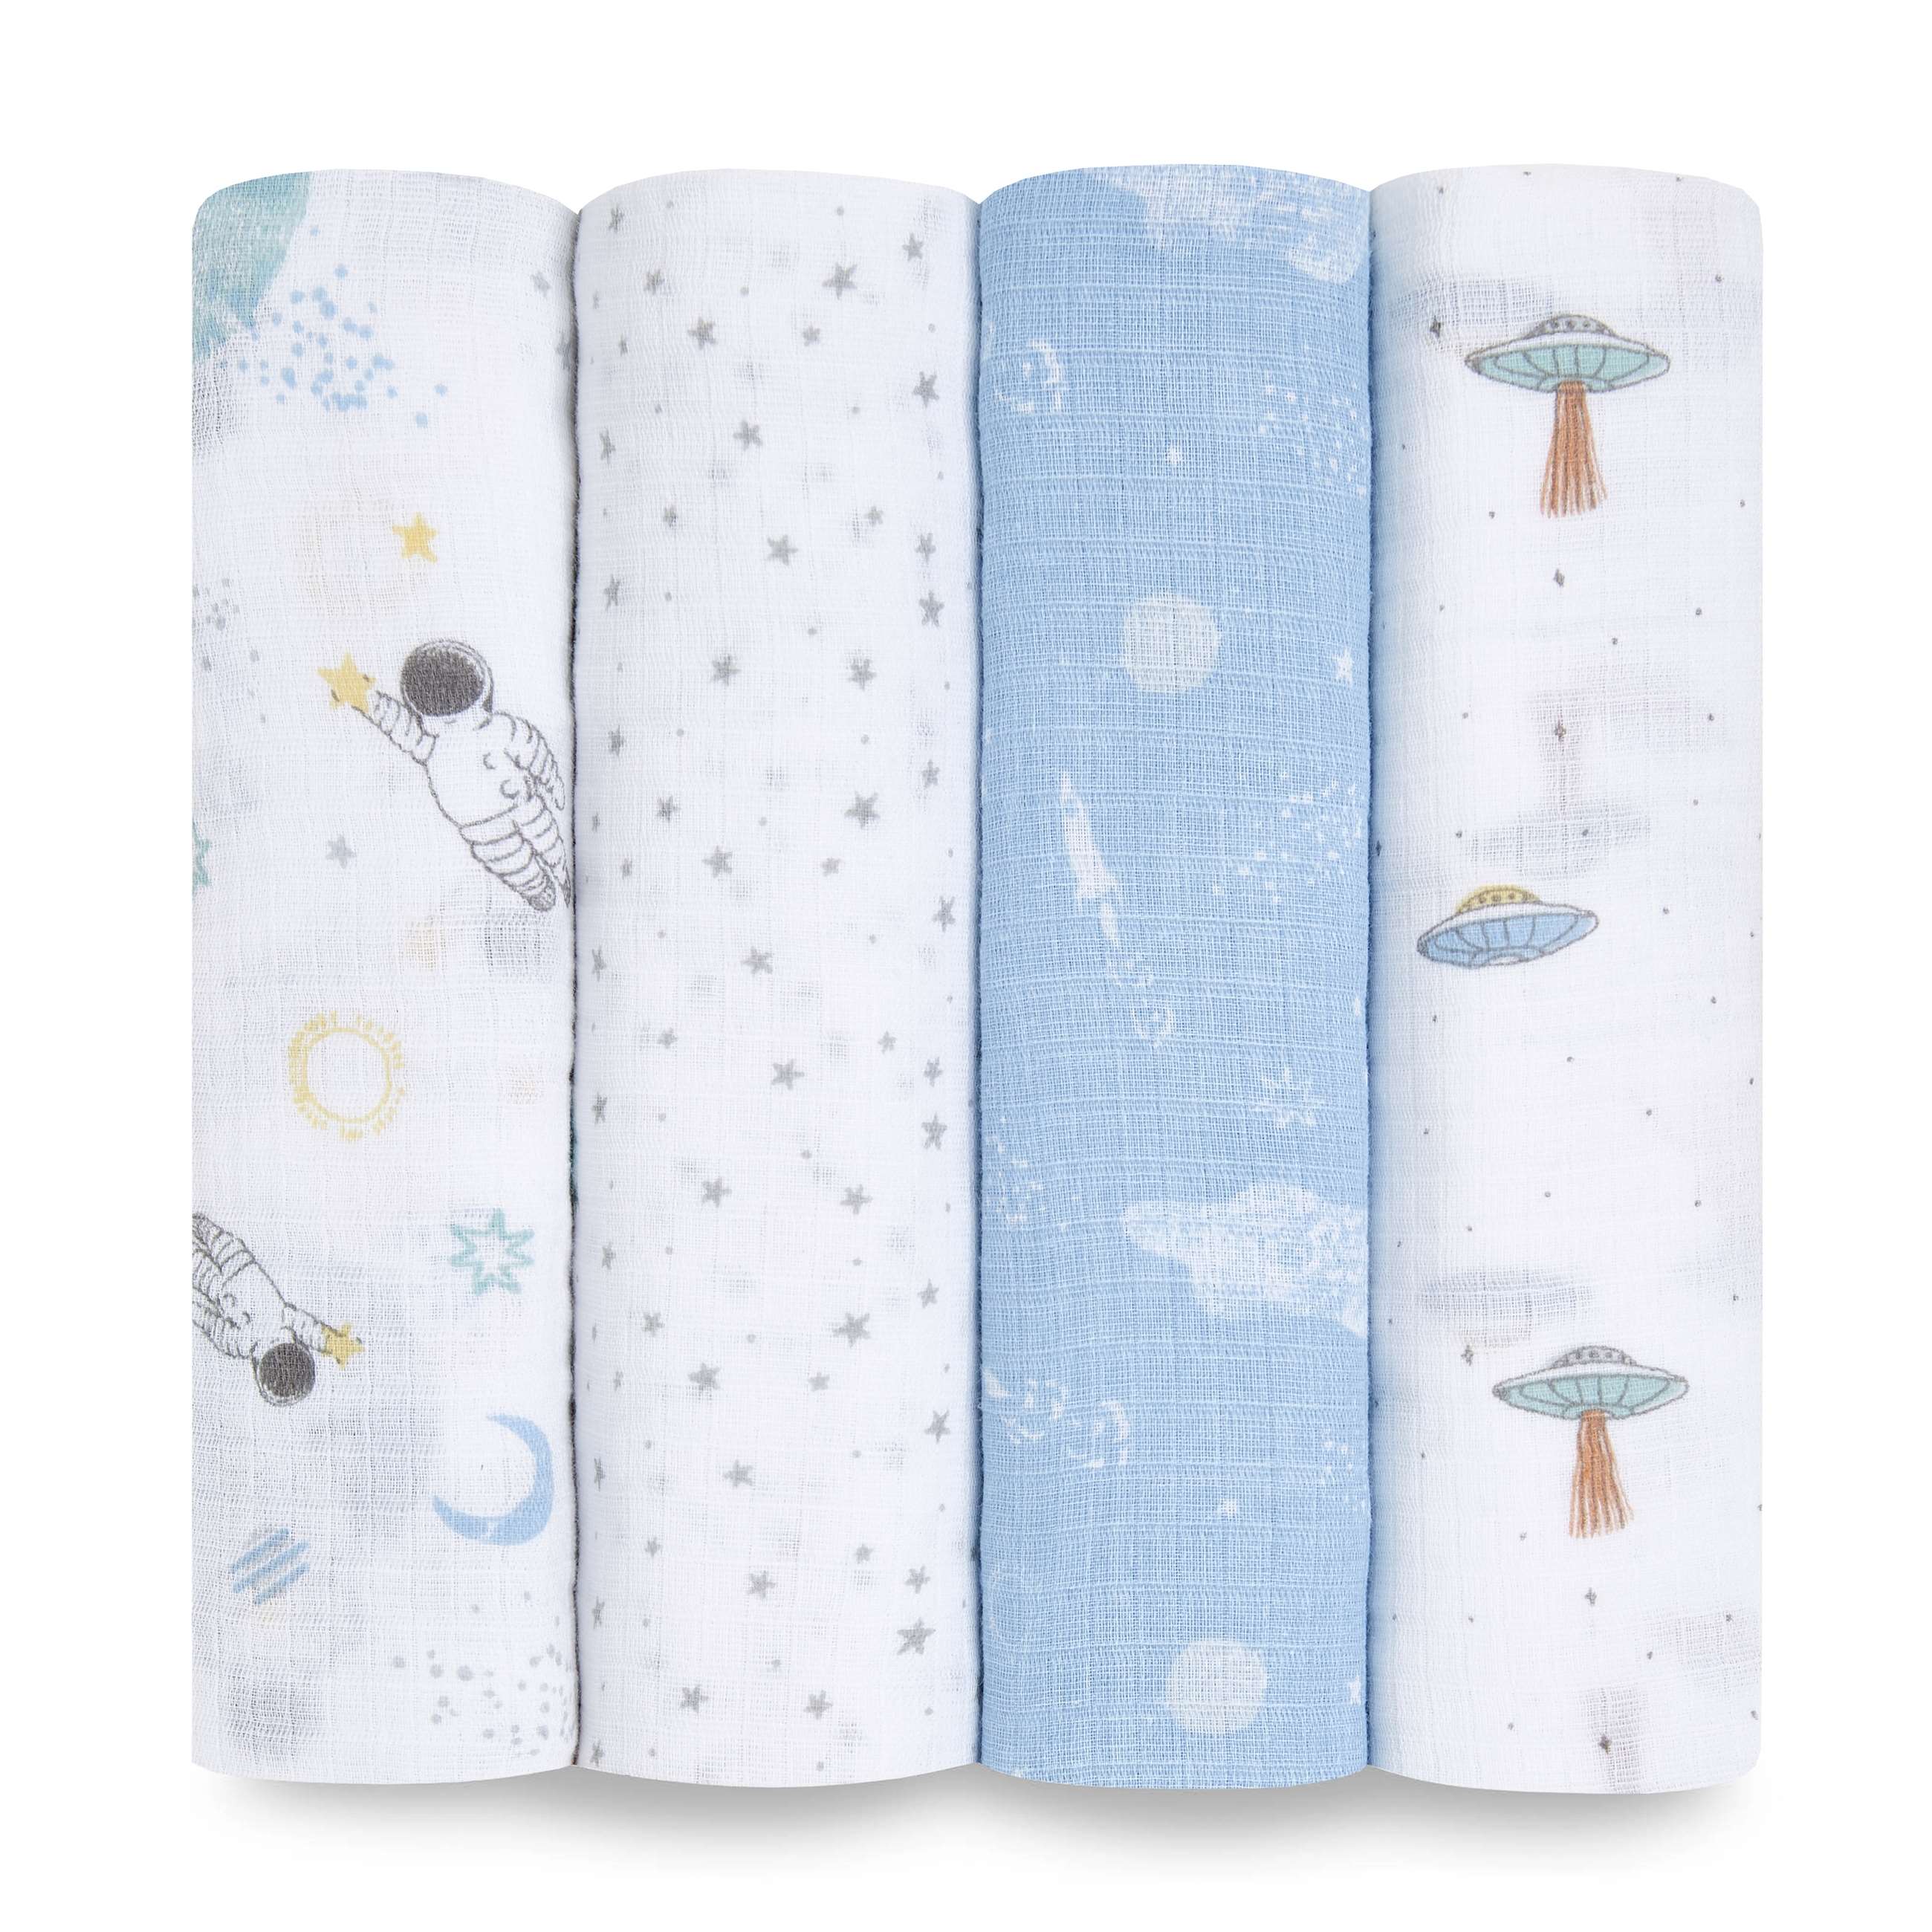 eswc40015-eswc40015b_0-essentials-cotton-muslin-swaddle-space-explorers-4pack